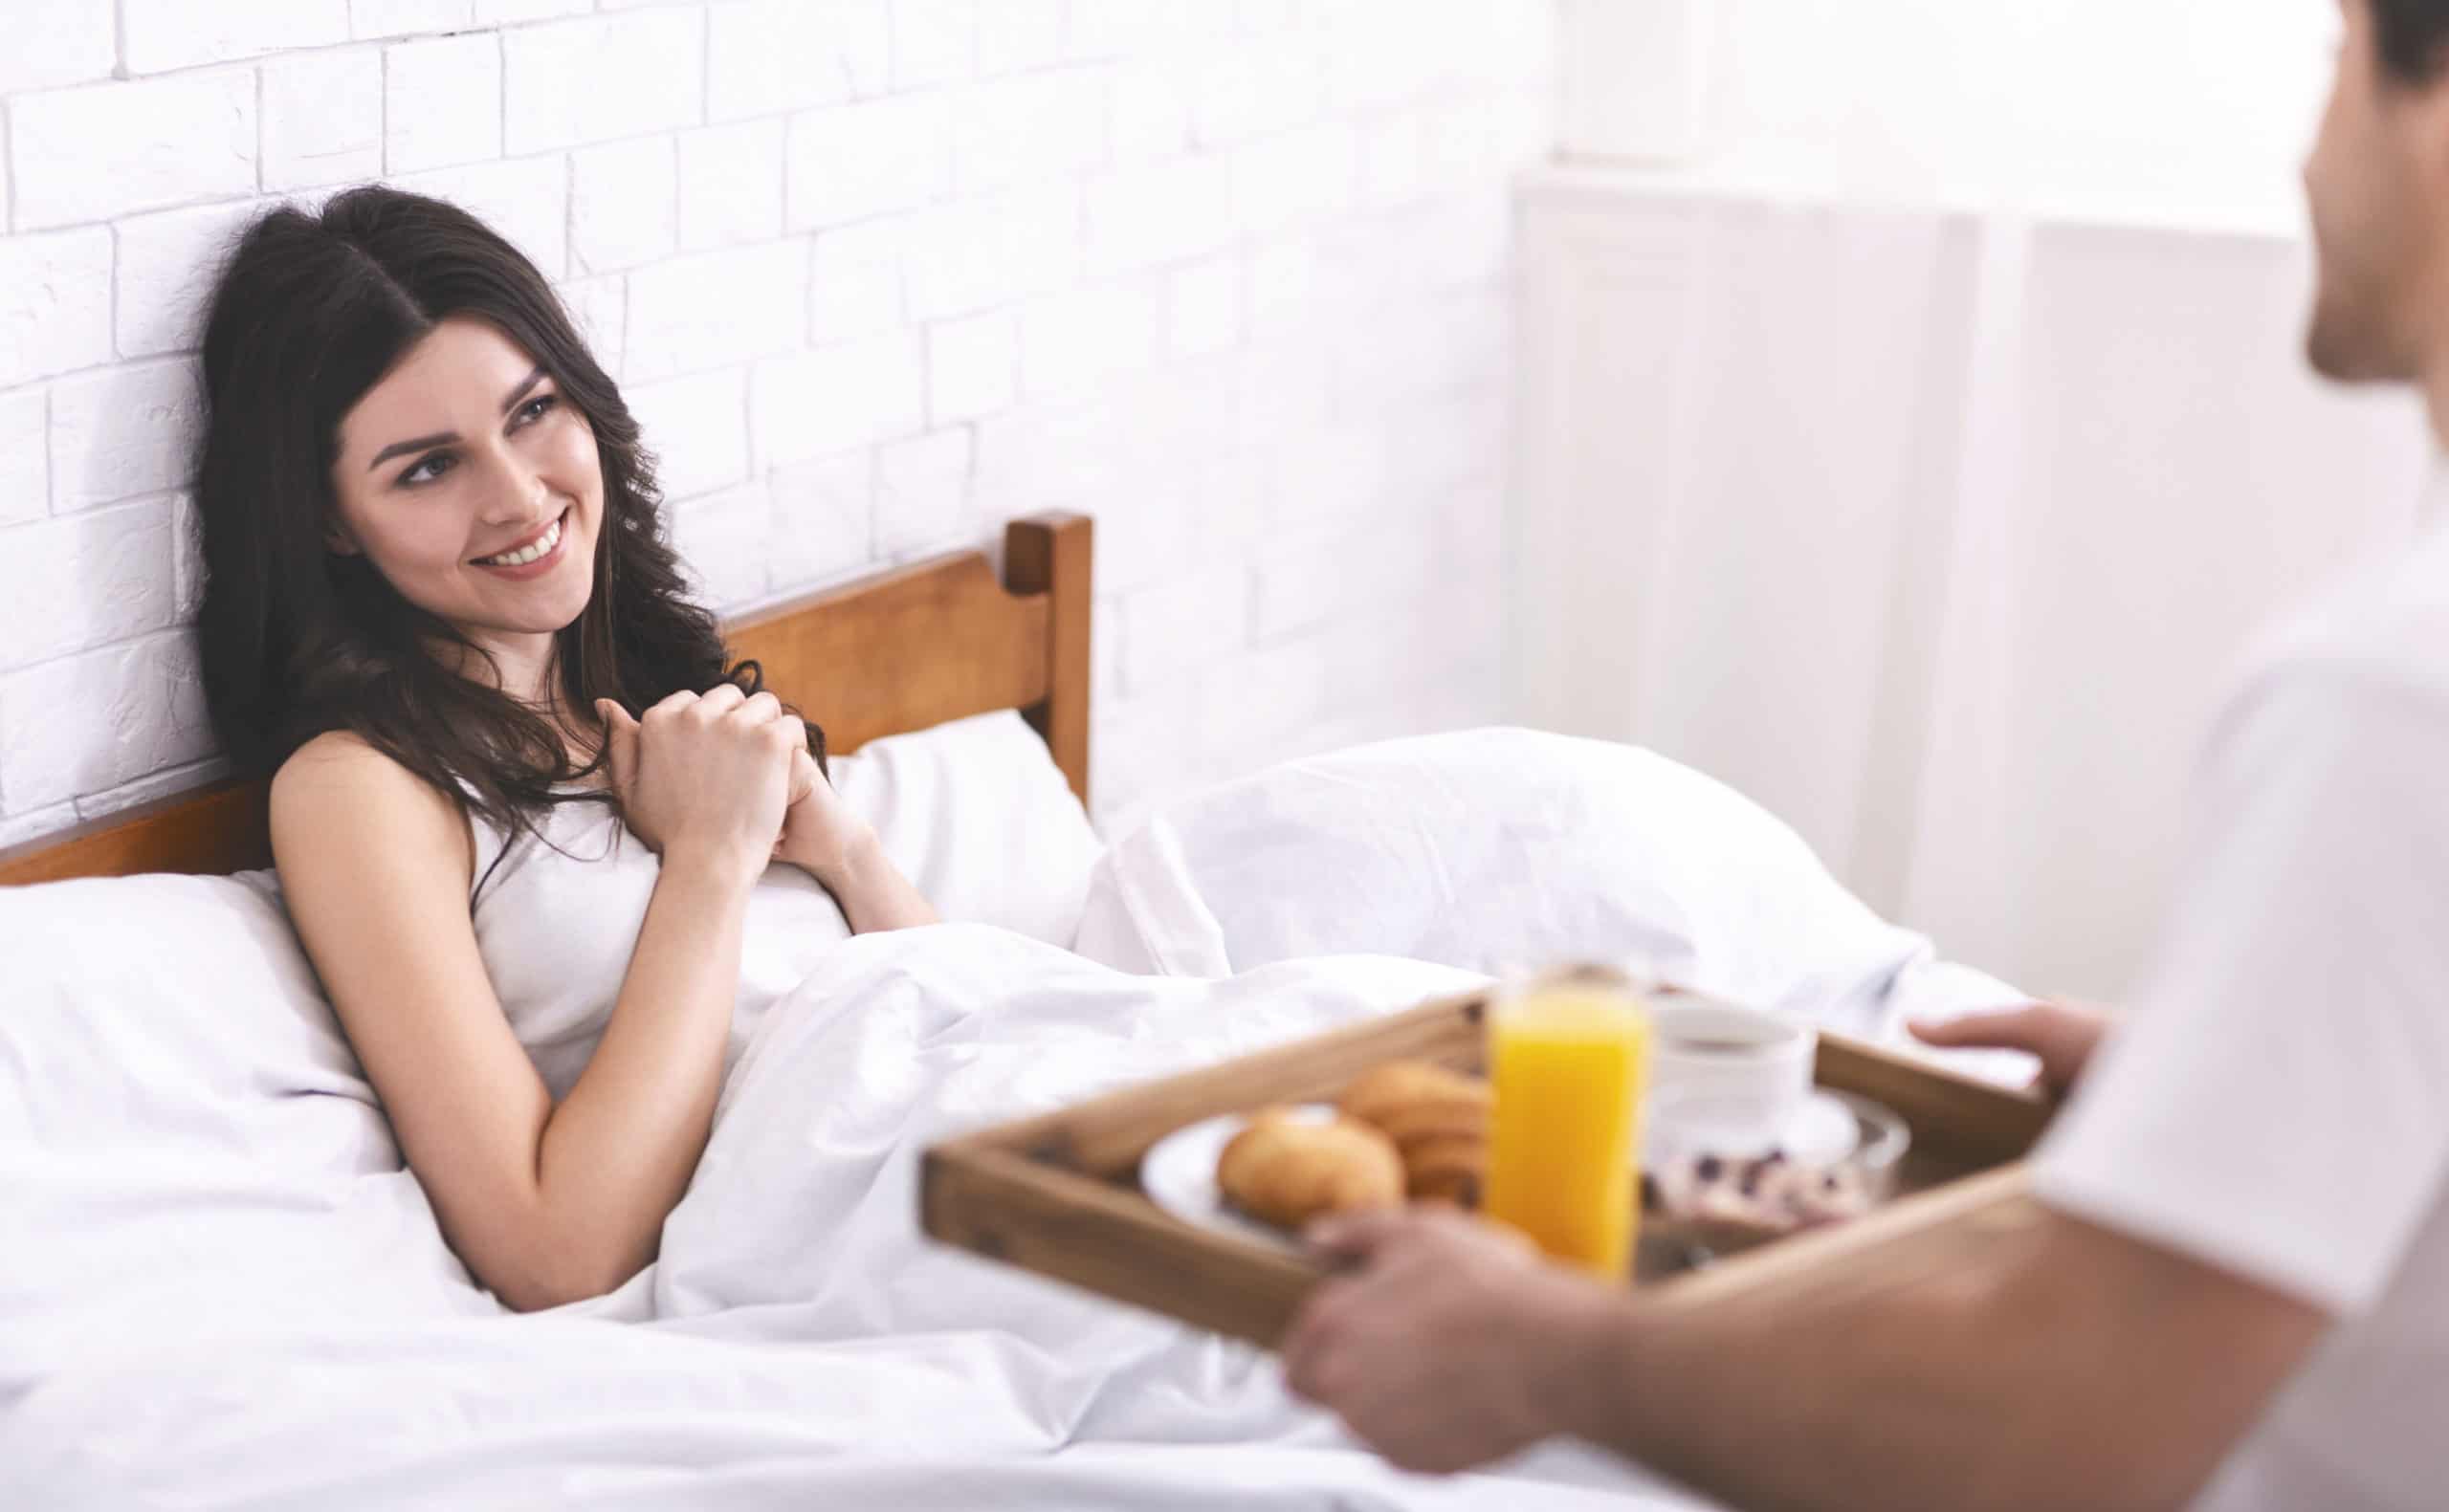 Smiling woman sitting up in bed as husband brings her breakfast on a tray